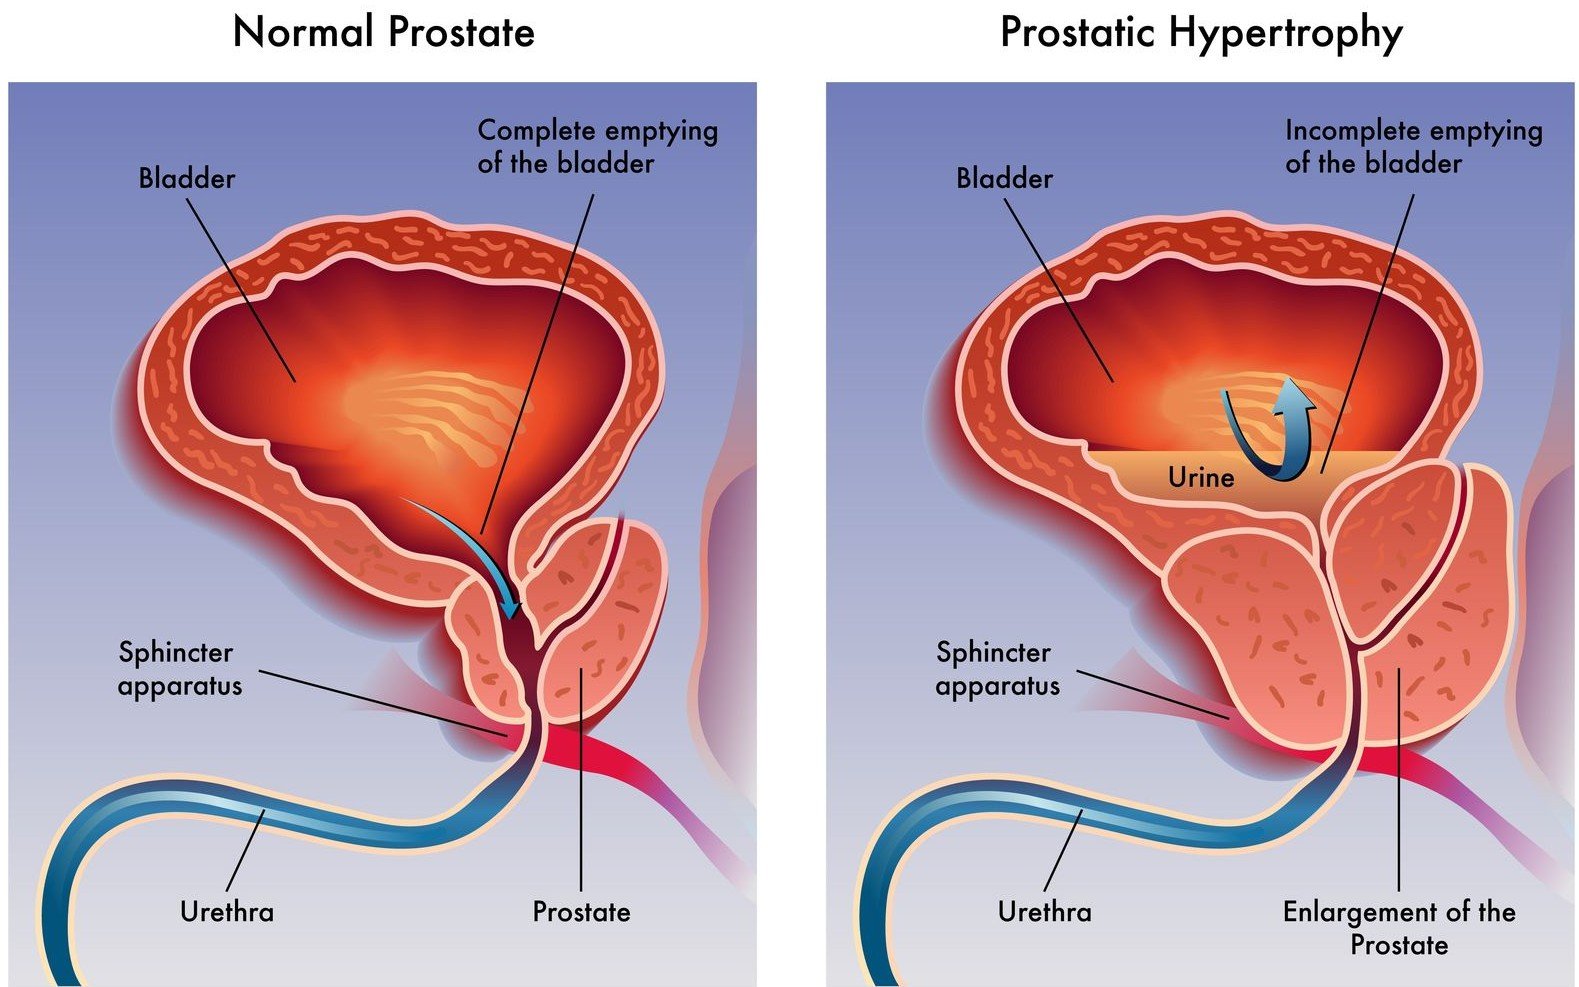 What causes enlargement of the prostate